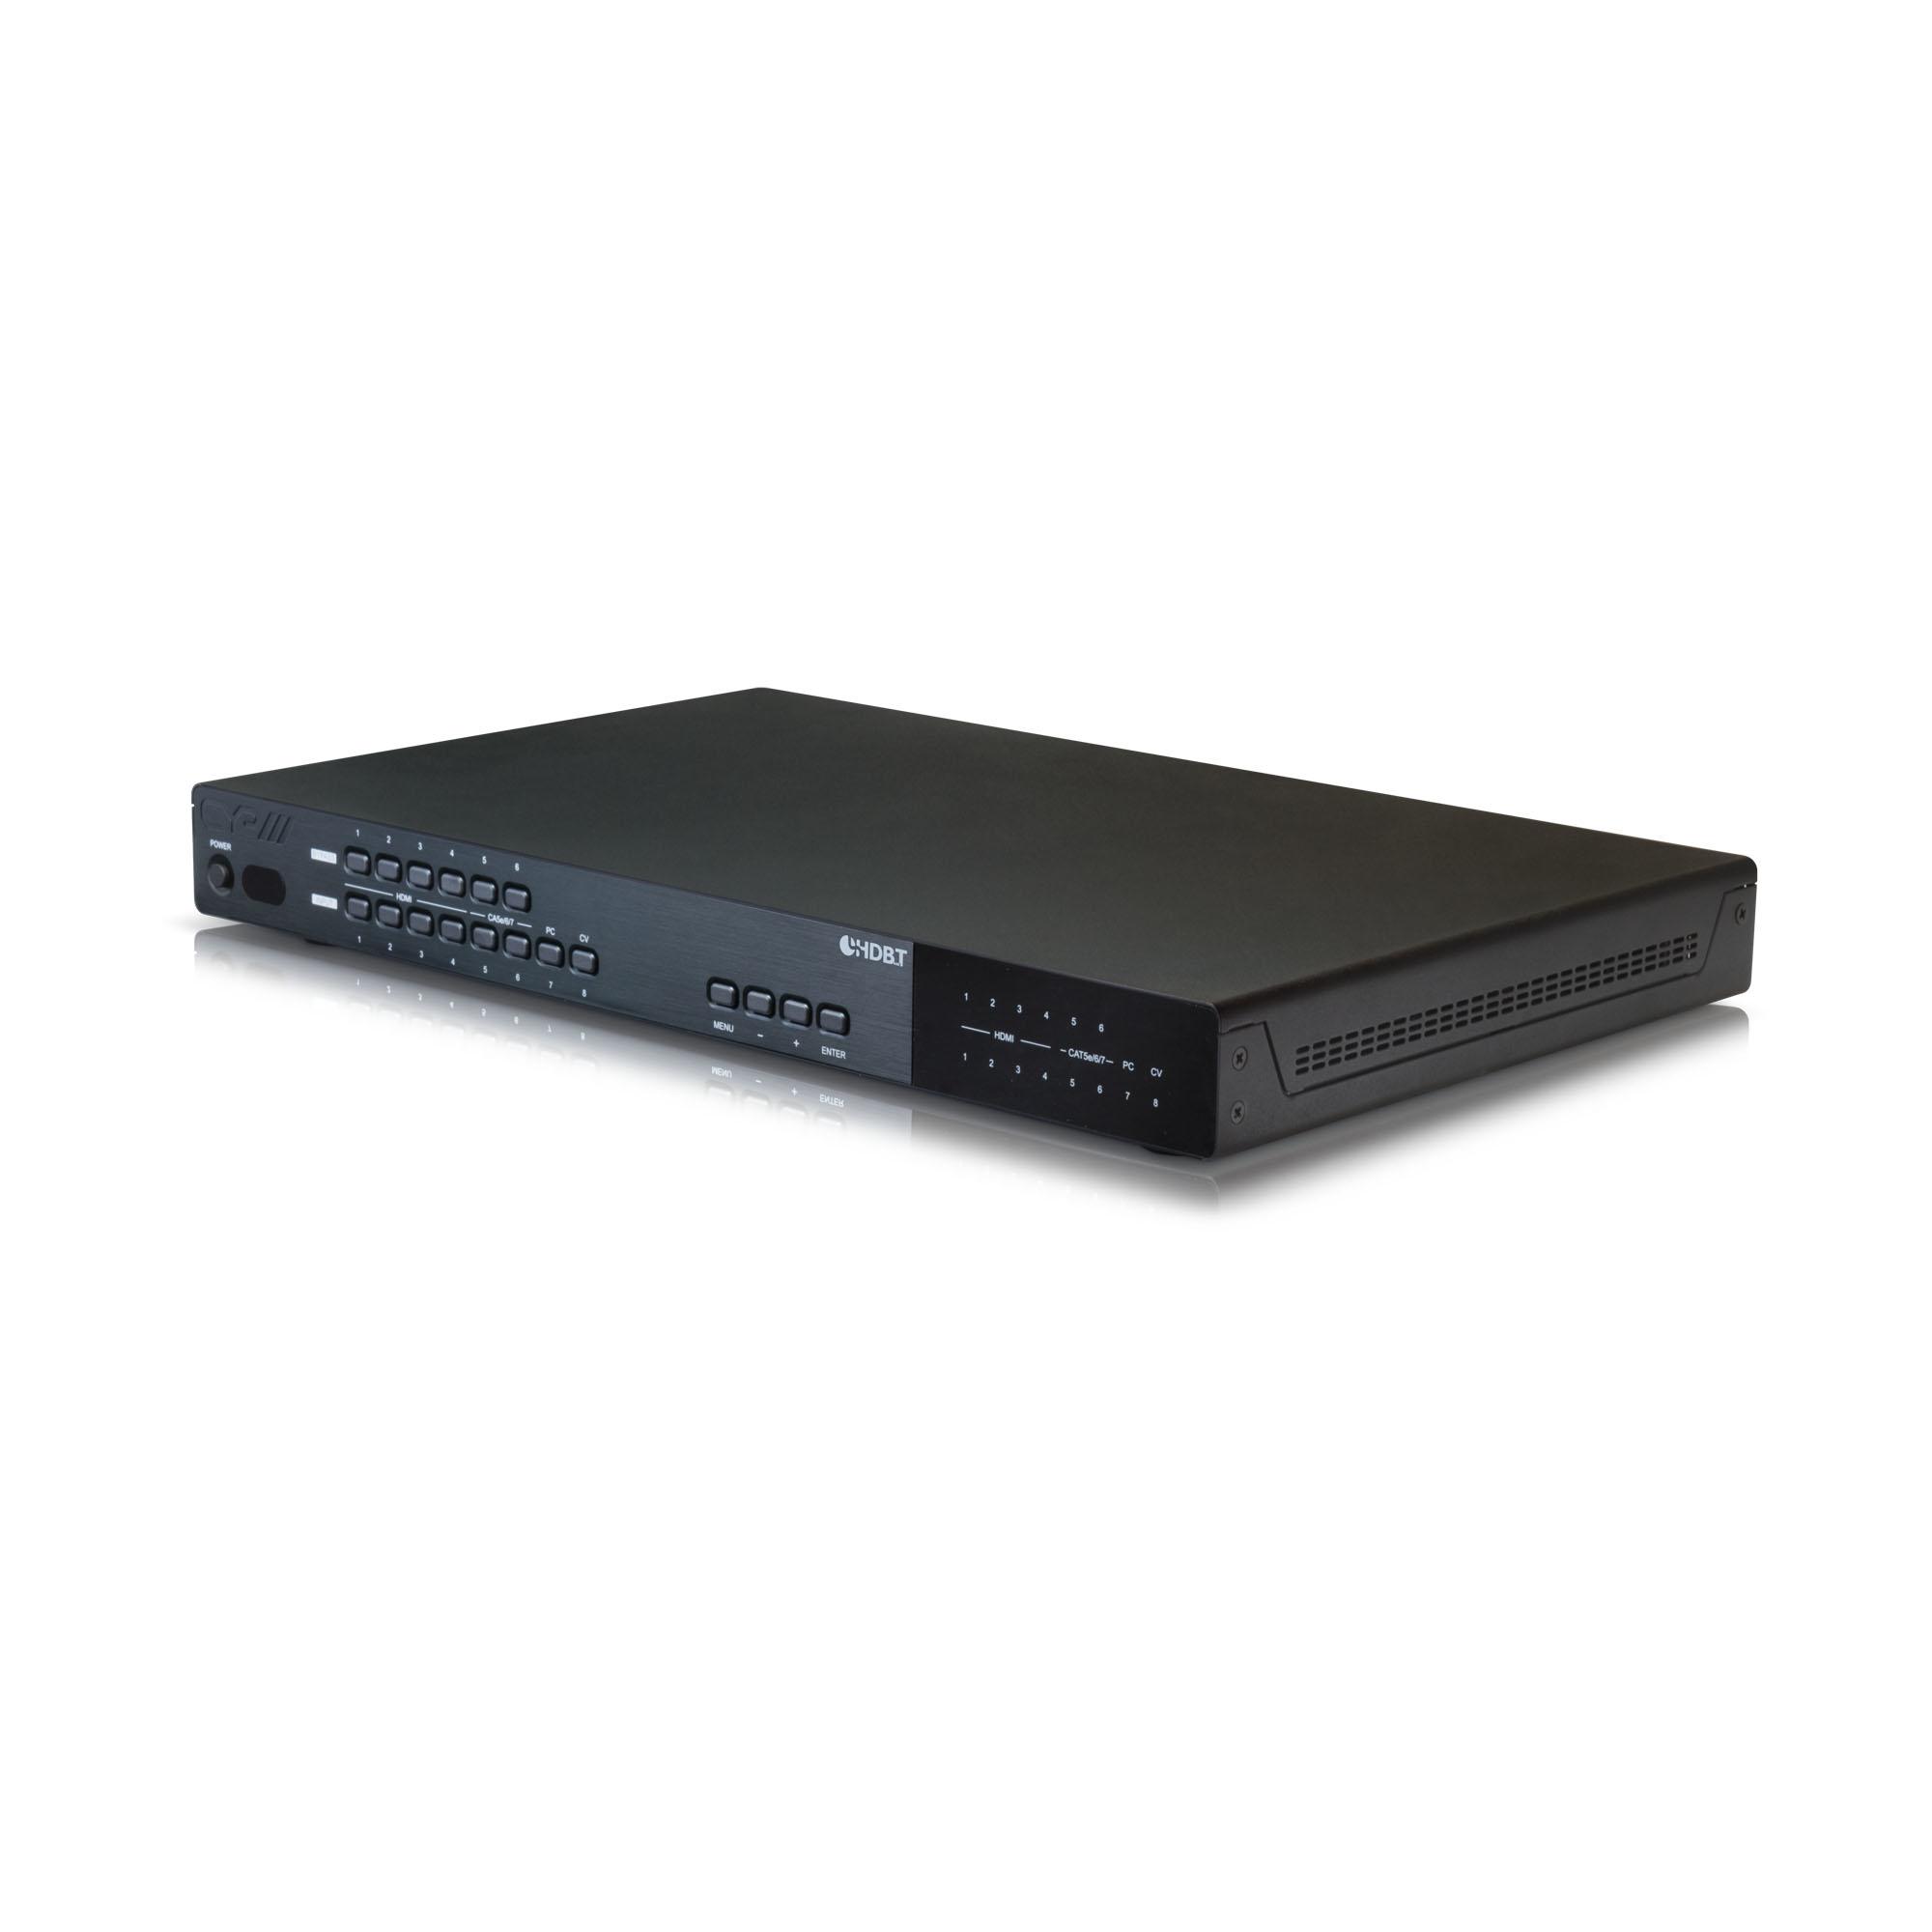 EL-5500-HBT 8 x 4 HDBaseT™ / HDMI / VGA Presentation Switch (with switchable digital bypass output)